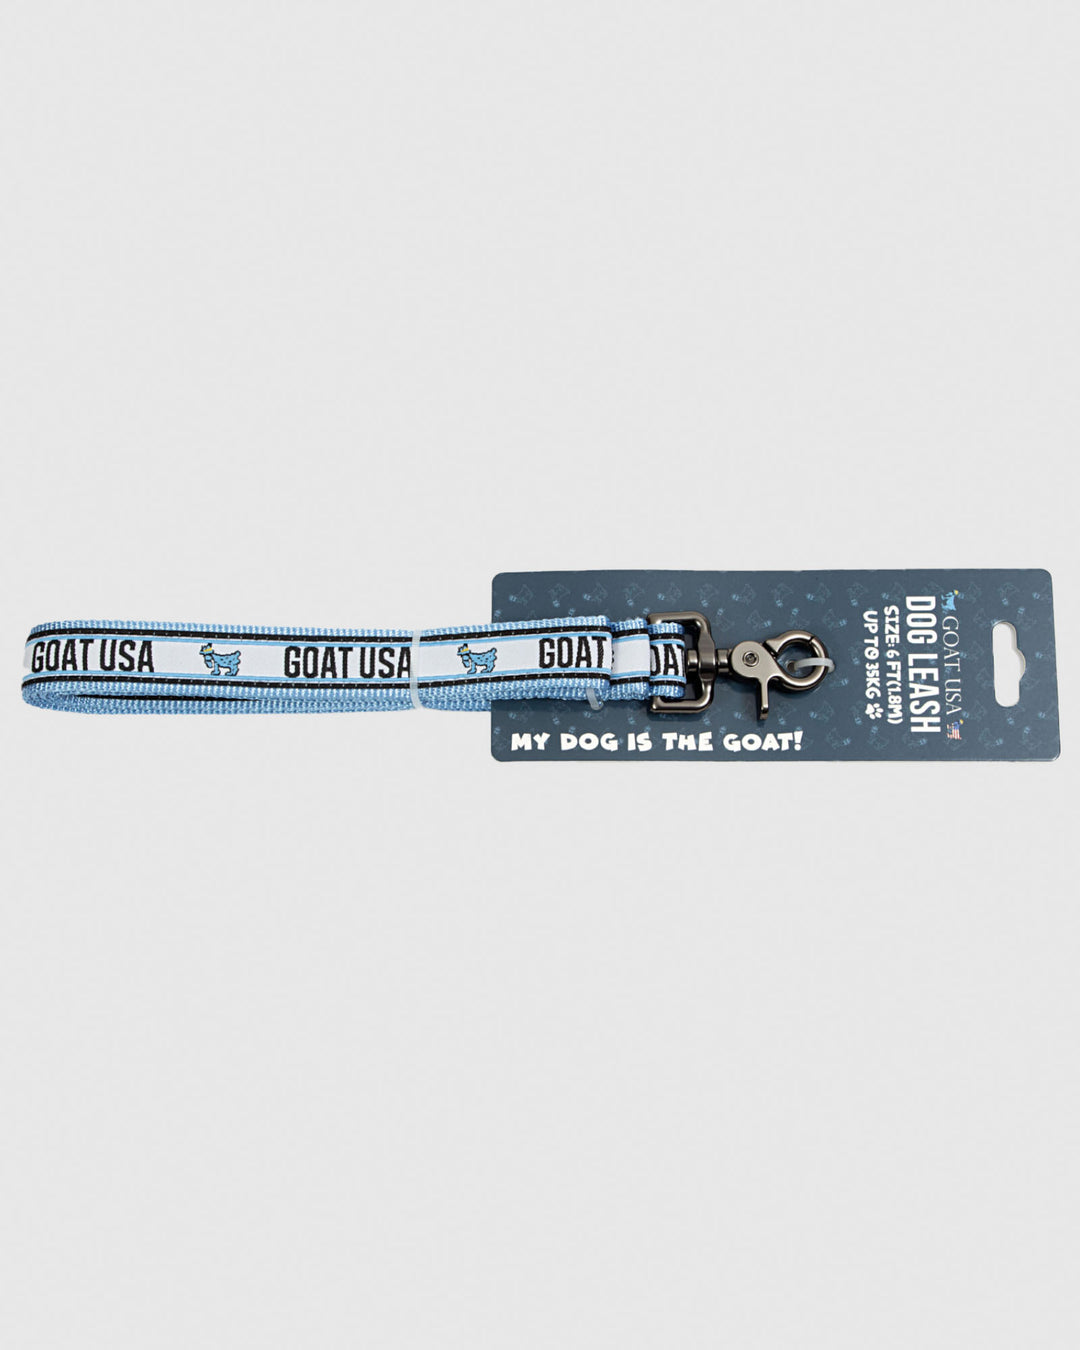 Blue and white dog leash in packaging